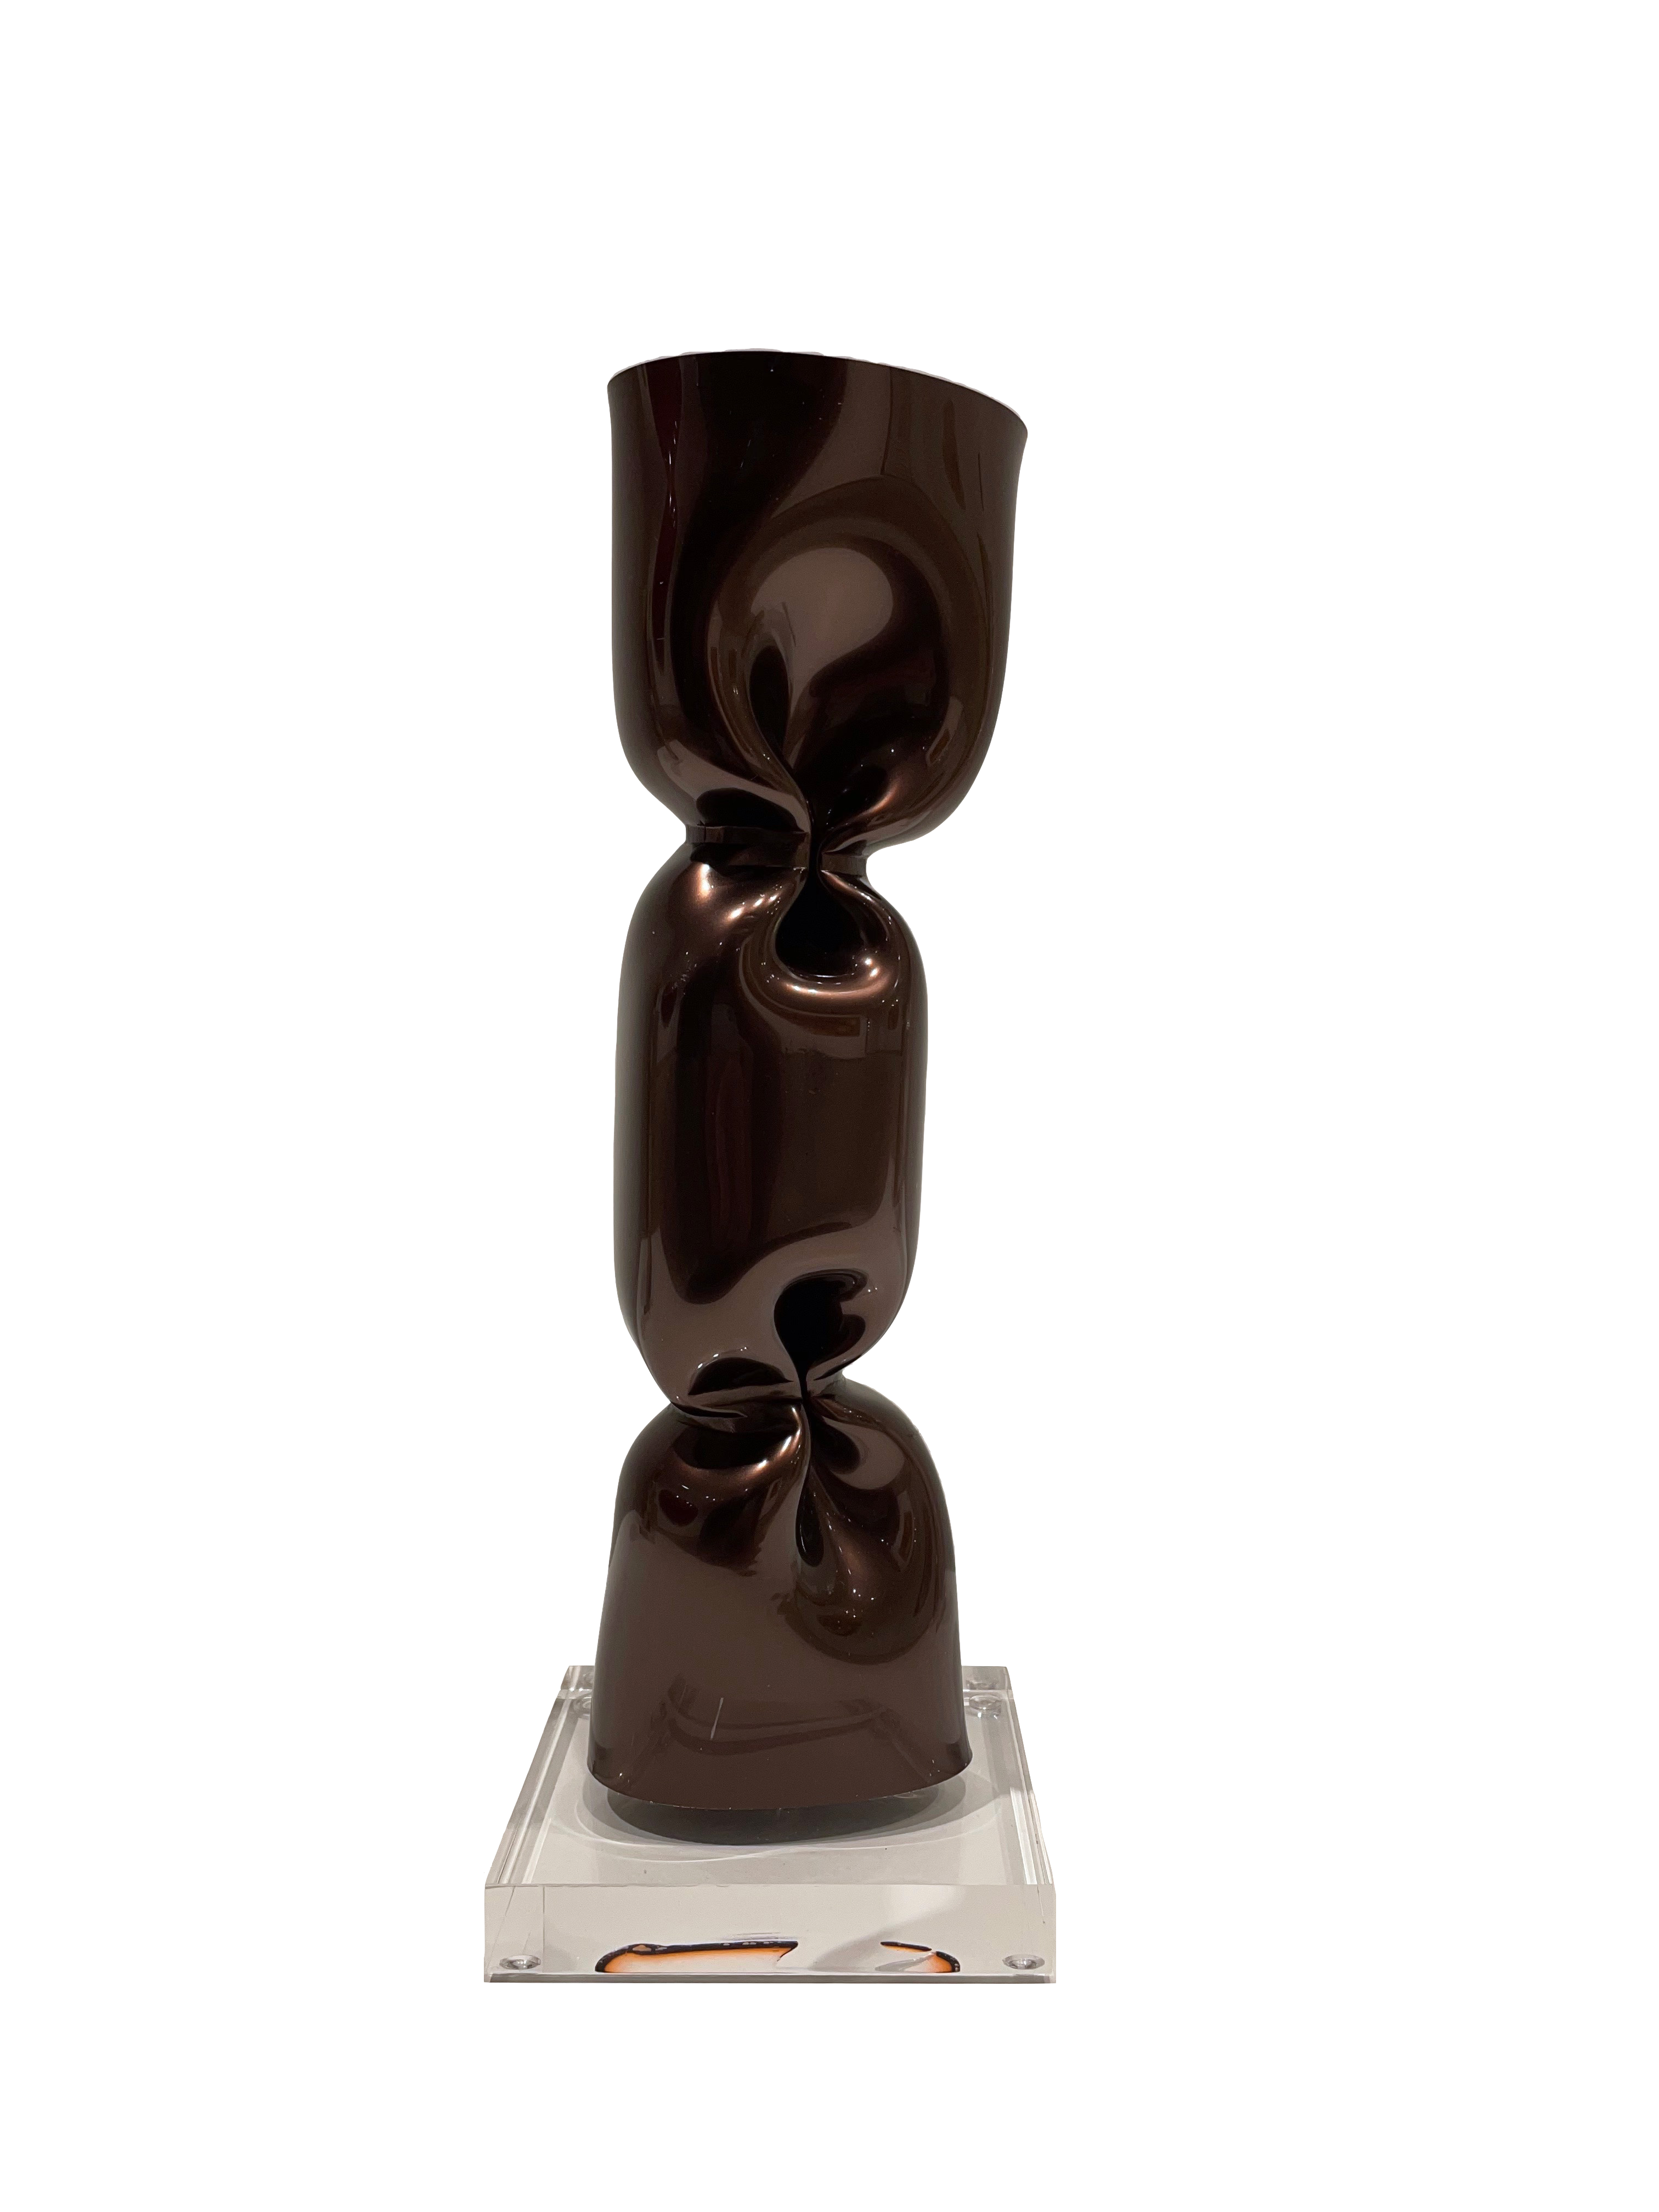 Laurence Jenk Artiste<br />
Wrapping Bonbon Chocolat nacre<br />
© Marciano Contemporary